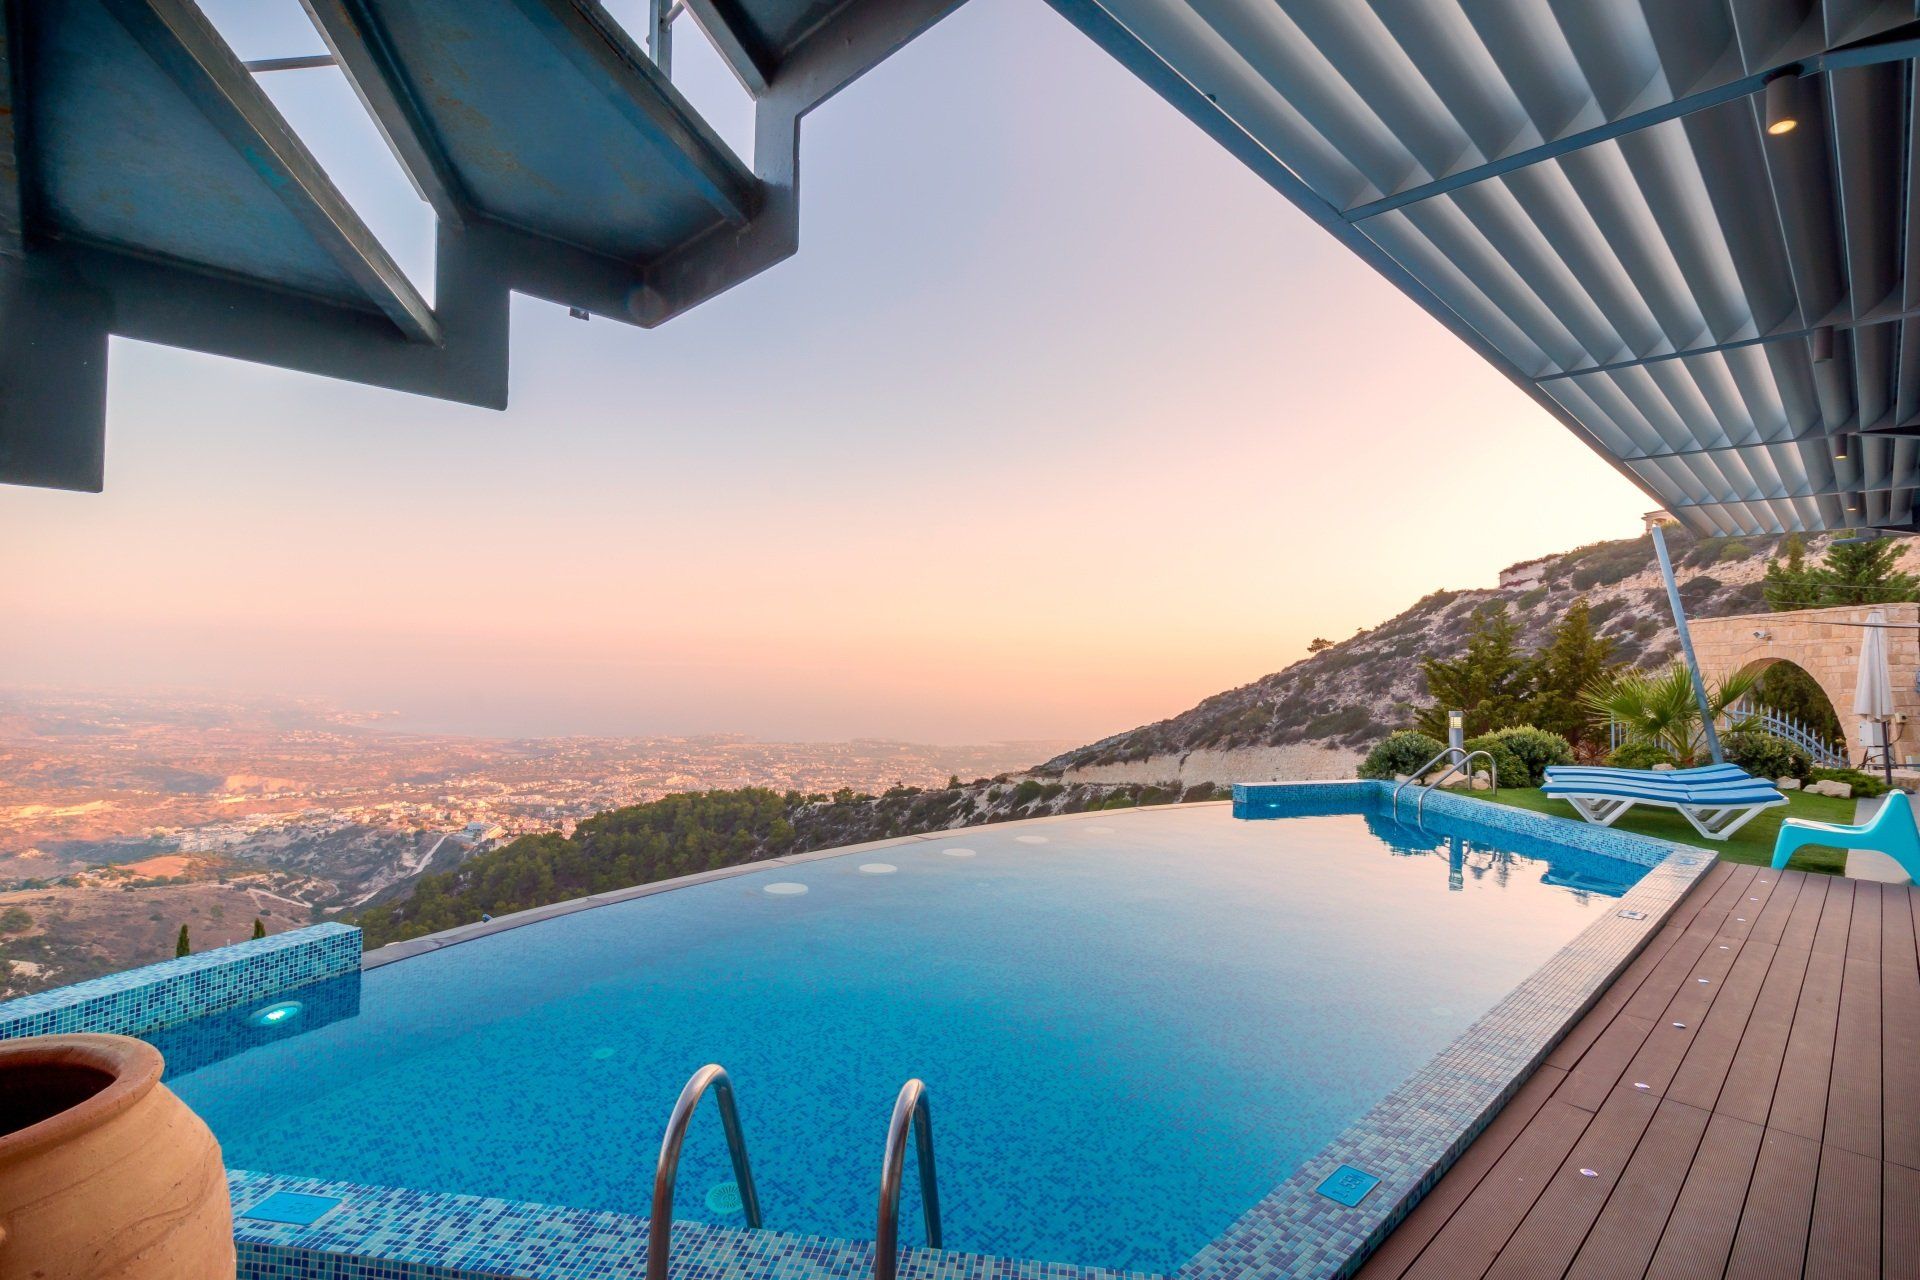 There is a swimming pool with a view of the mountains in the background.